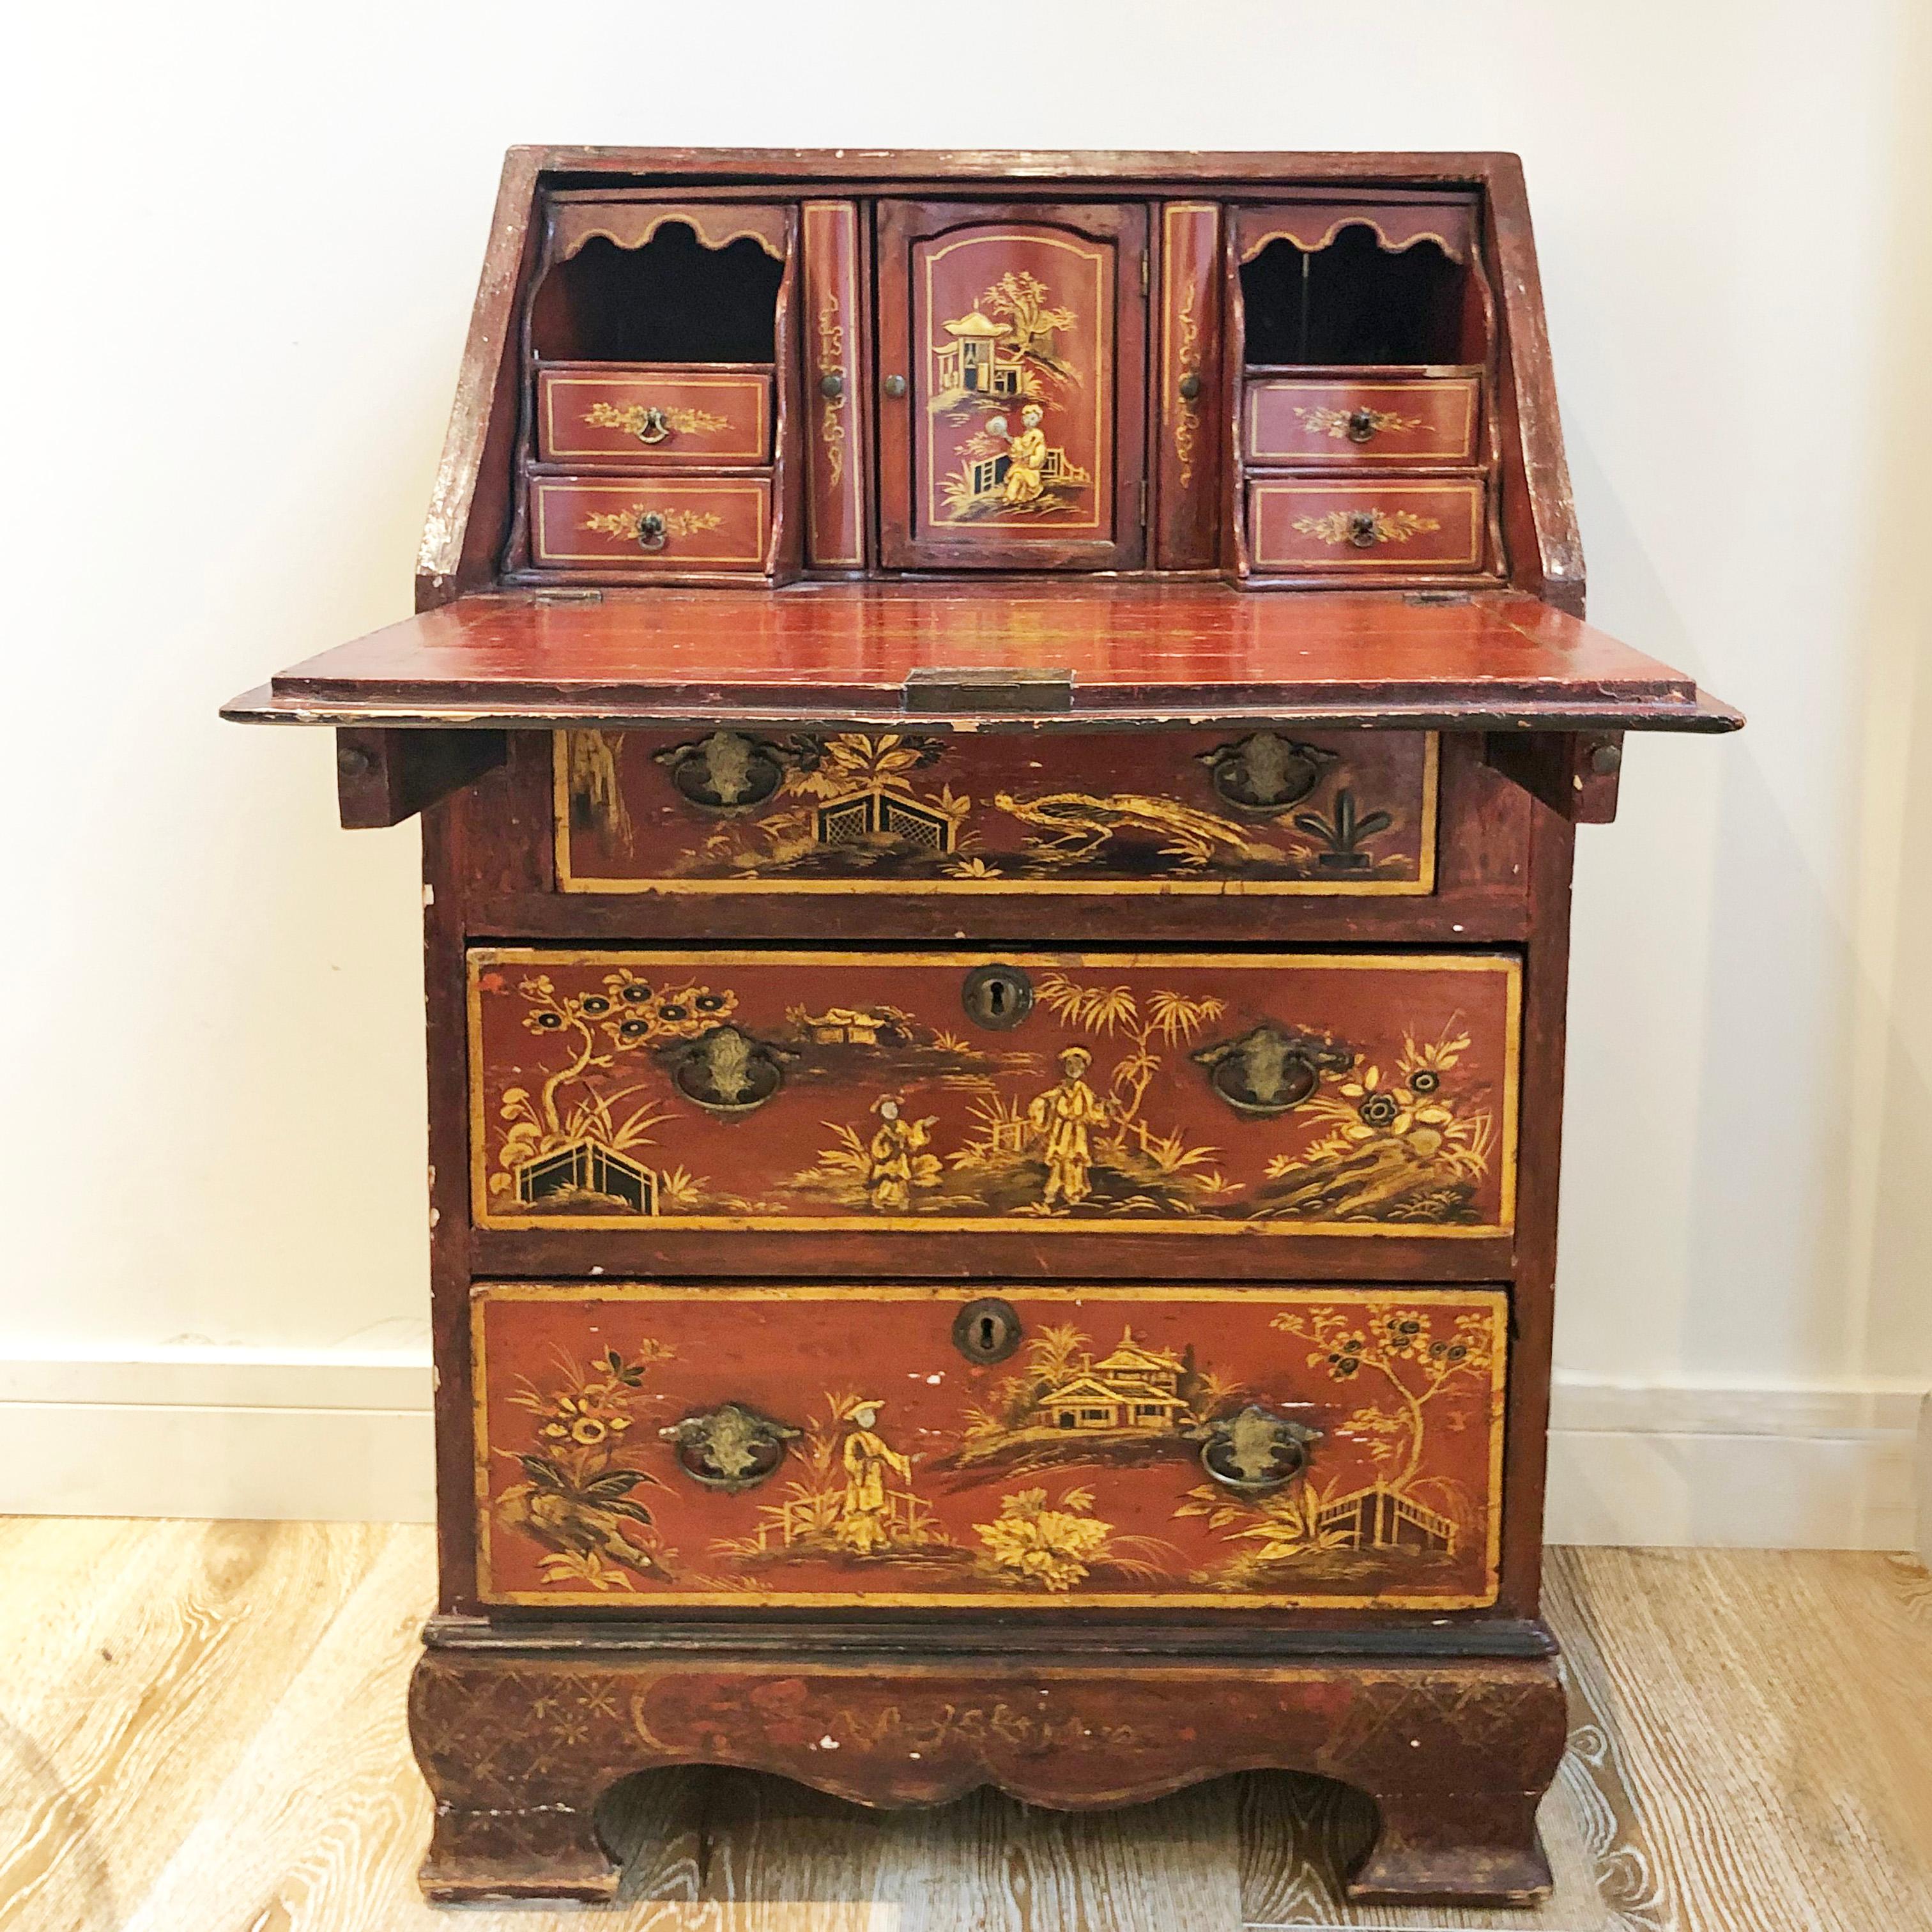 Mid-19th century English writing bureau with oriental detailing. Red painted oak body with 3 drawers and slanted writing surface. A truly unique piece with a variety of drawers with bronze fittings and strap handles inside.

Measures: 56 W x 47 D